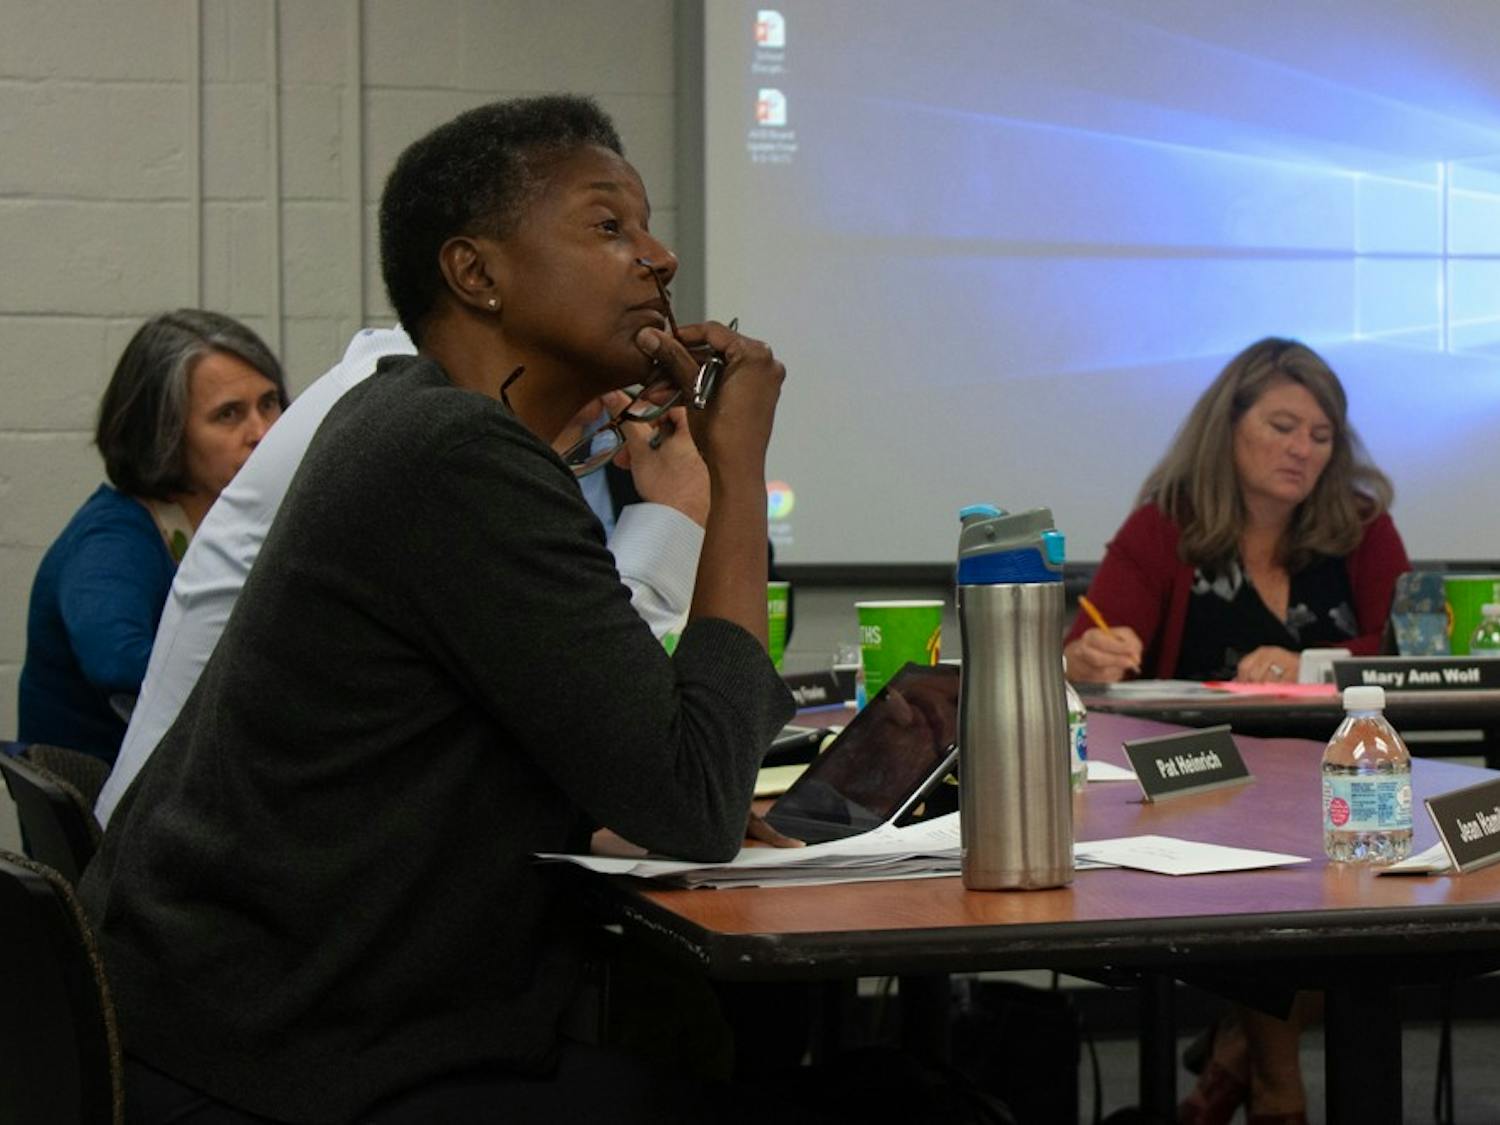 Chapel Hill-Carrboro City Schools Board of Education members listen to comments from the public during a work session on Thursday, Oct. 3, 2019 in Chapel Hill.